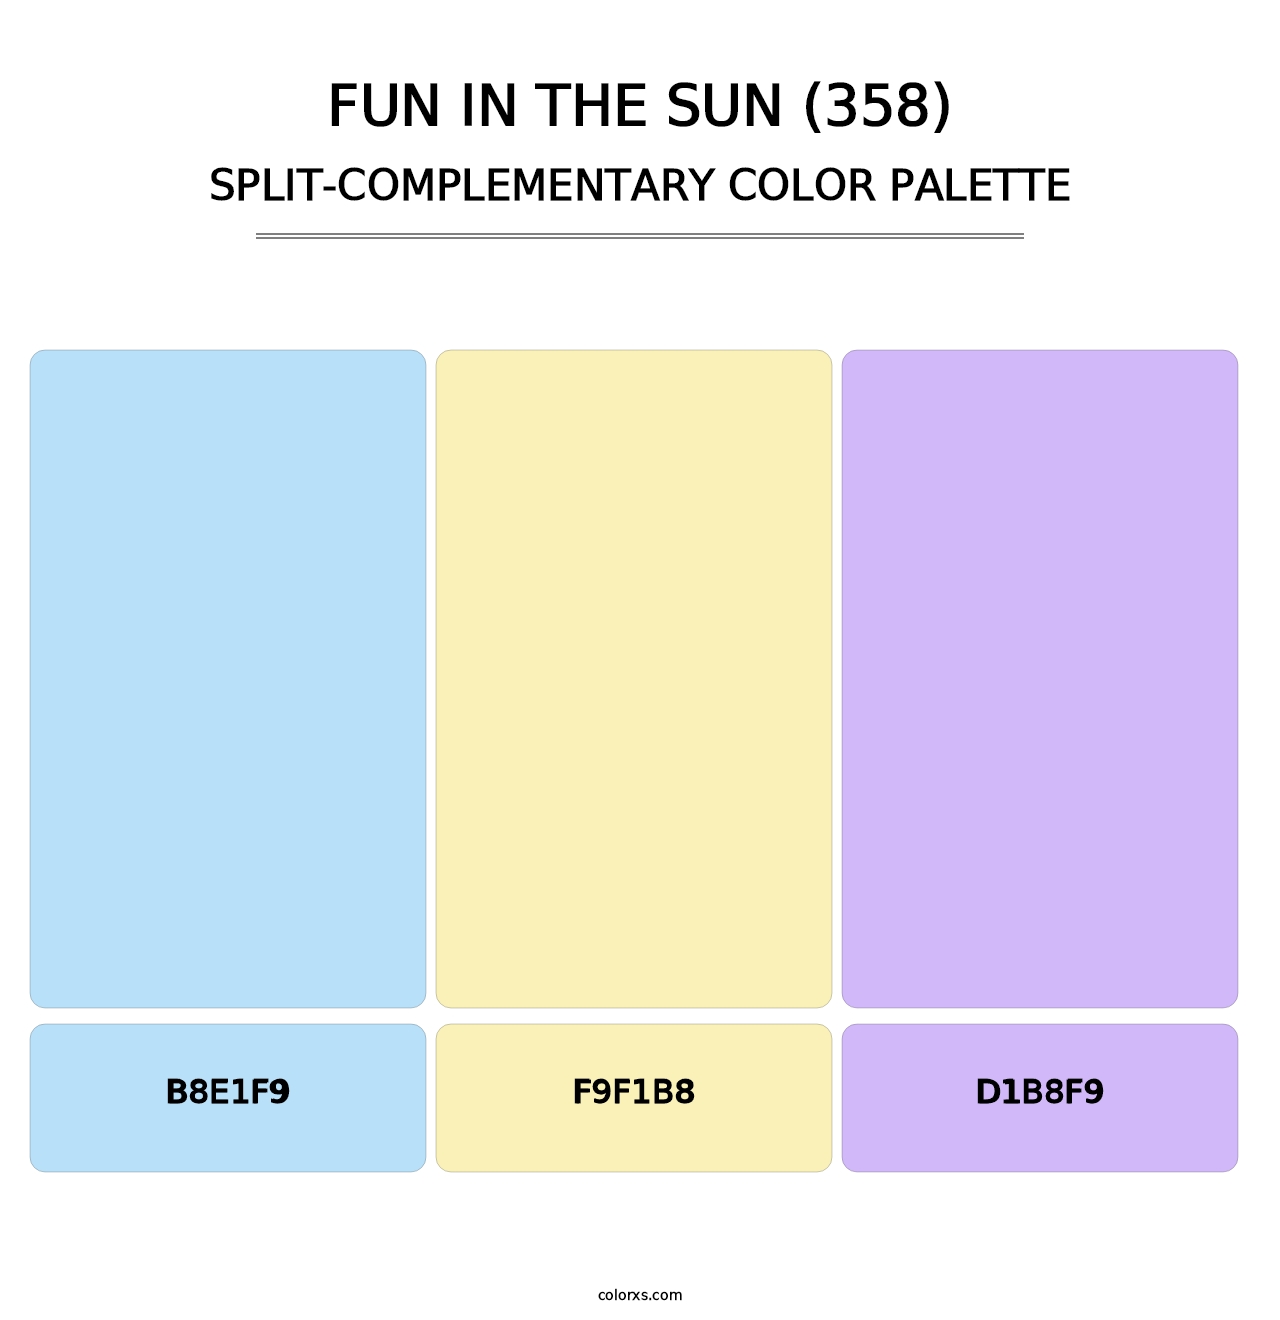 Fun in the Sun (358) - Split-Complementary Color Palette